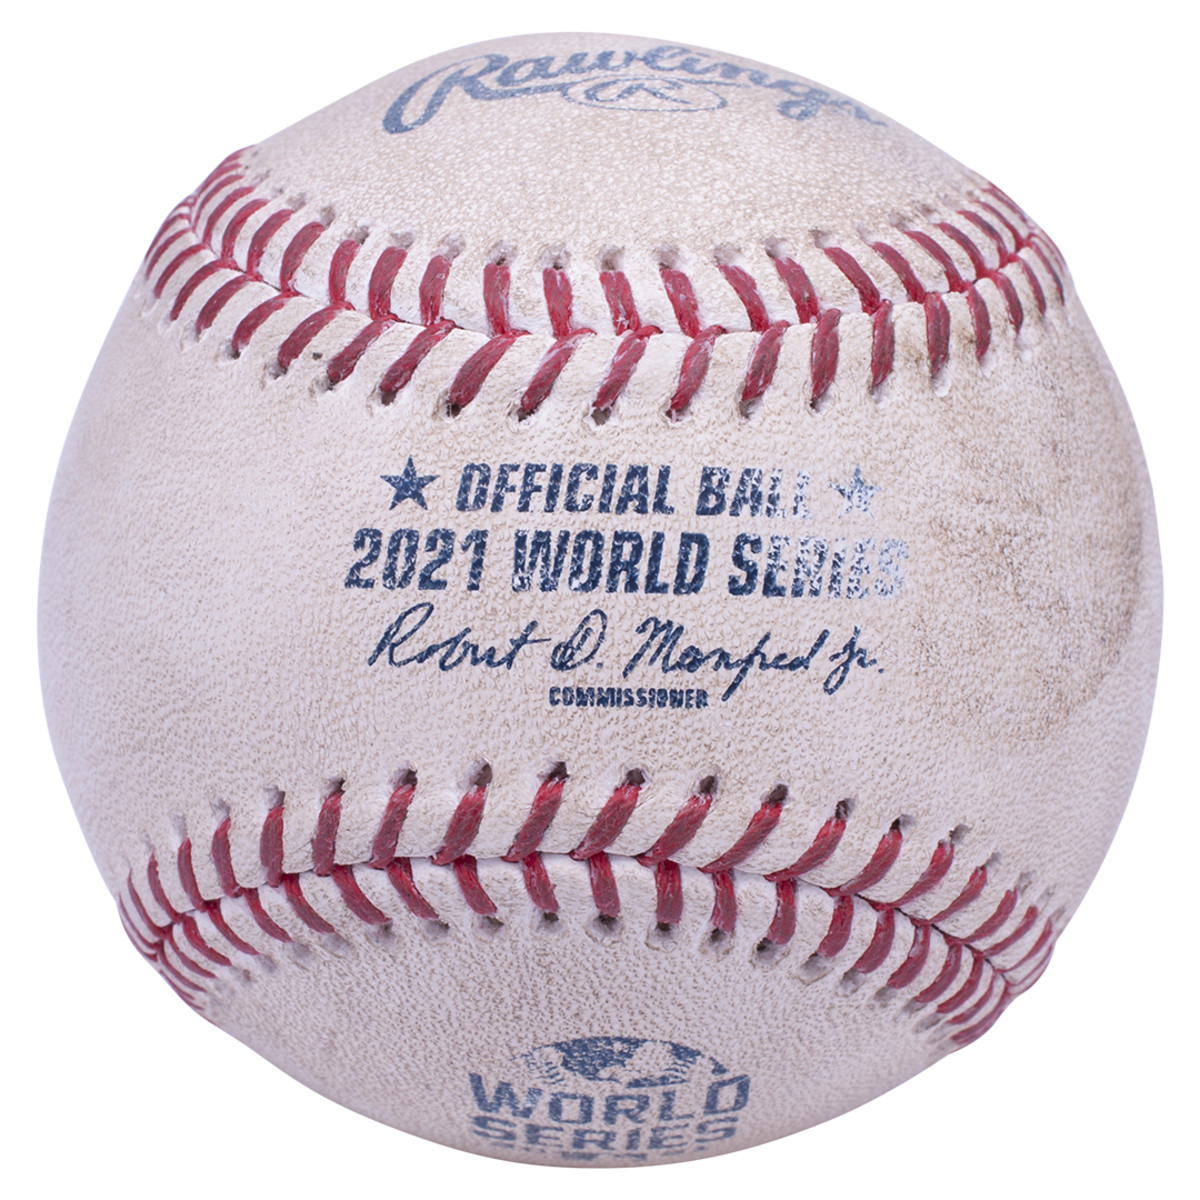 Jorge Soler home run ball from Game 6 of the 2021 World Series.